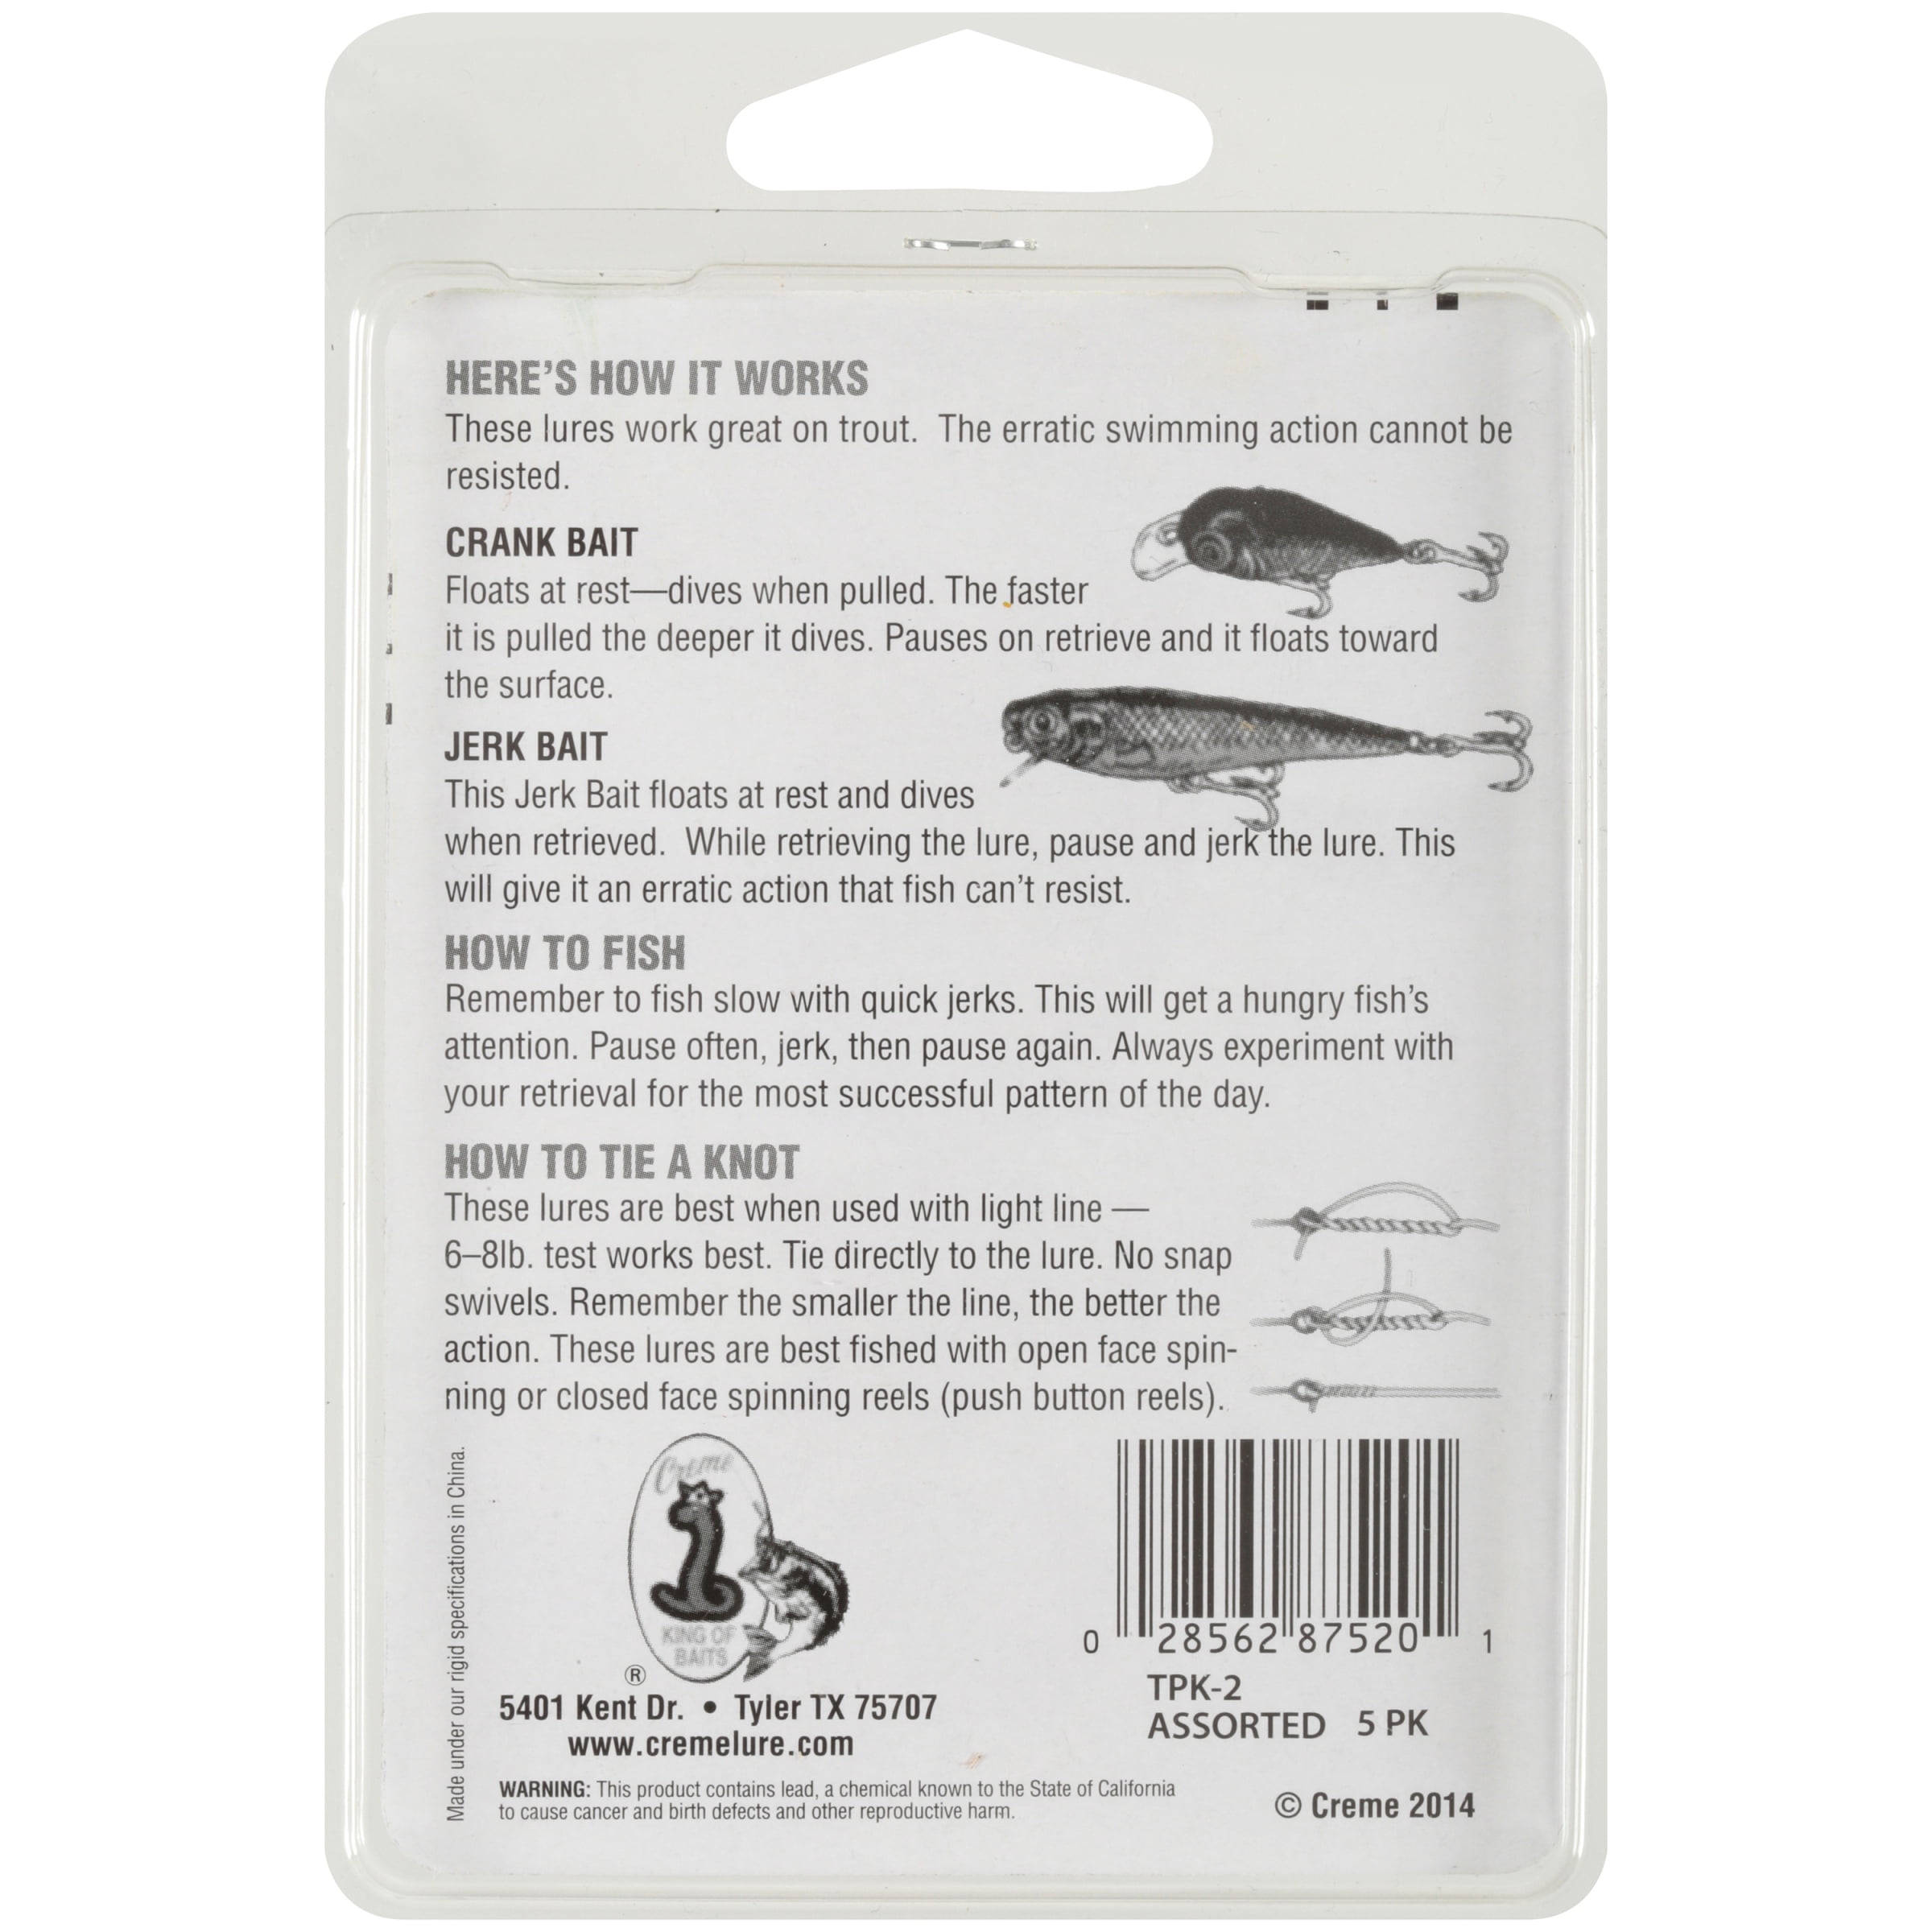 Creme Trout Hard Bait Kit, 5 Pack, Assorted Colors 